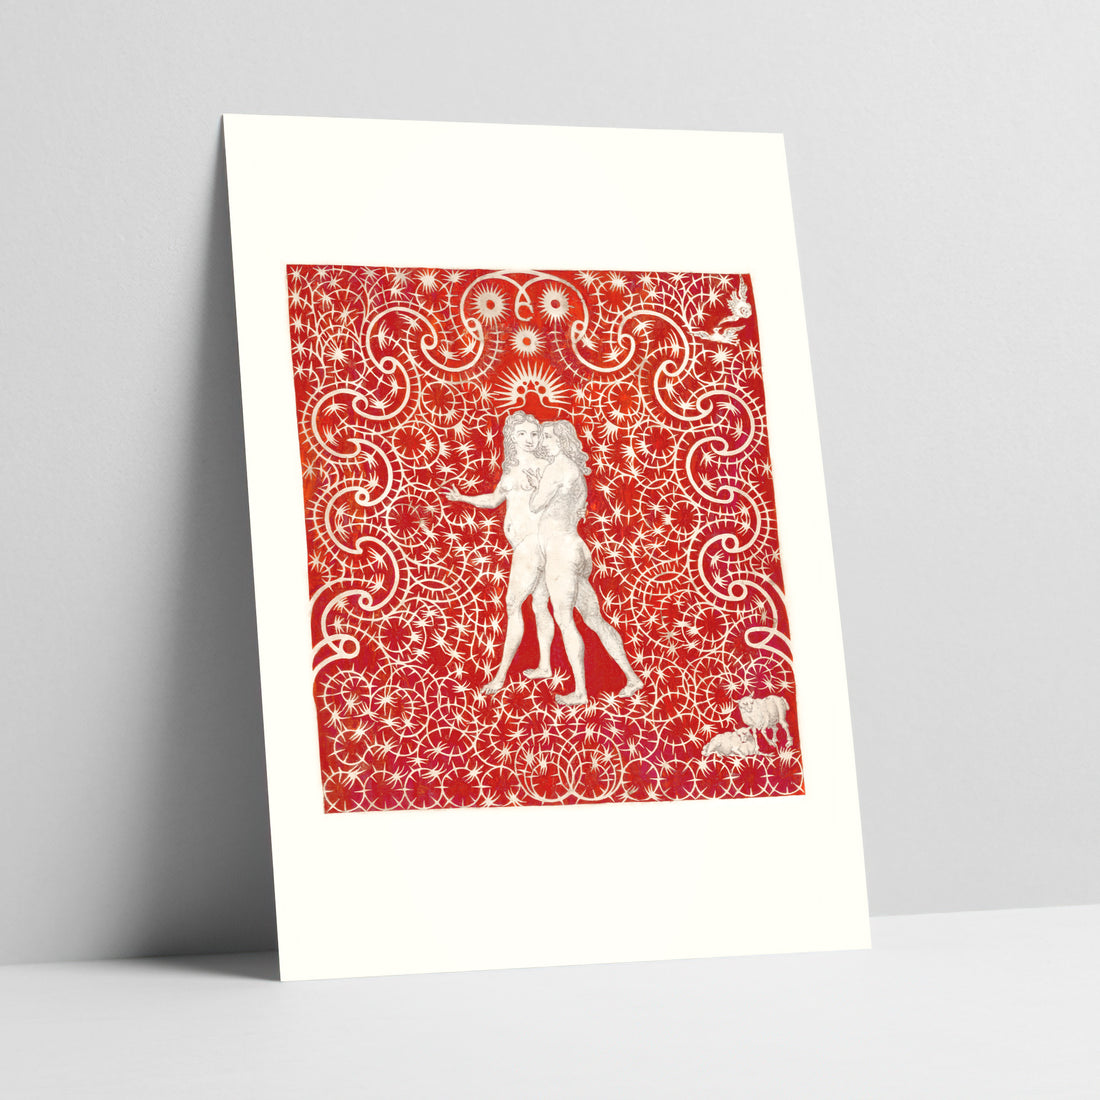 Entwined Figures with Ornate Red Background Vintage Art Print